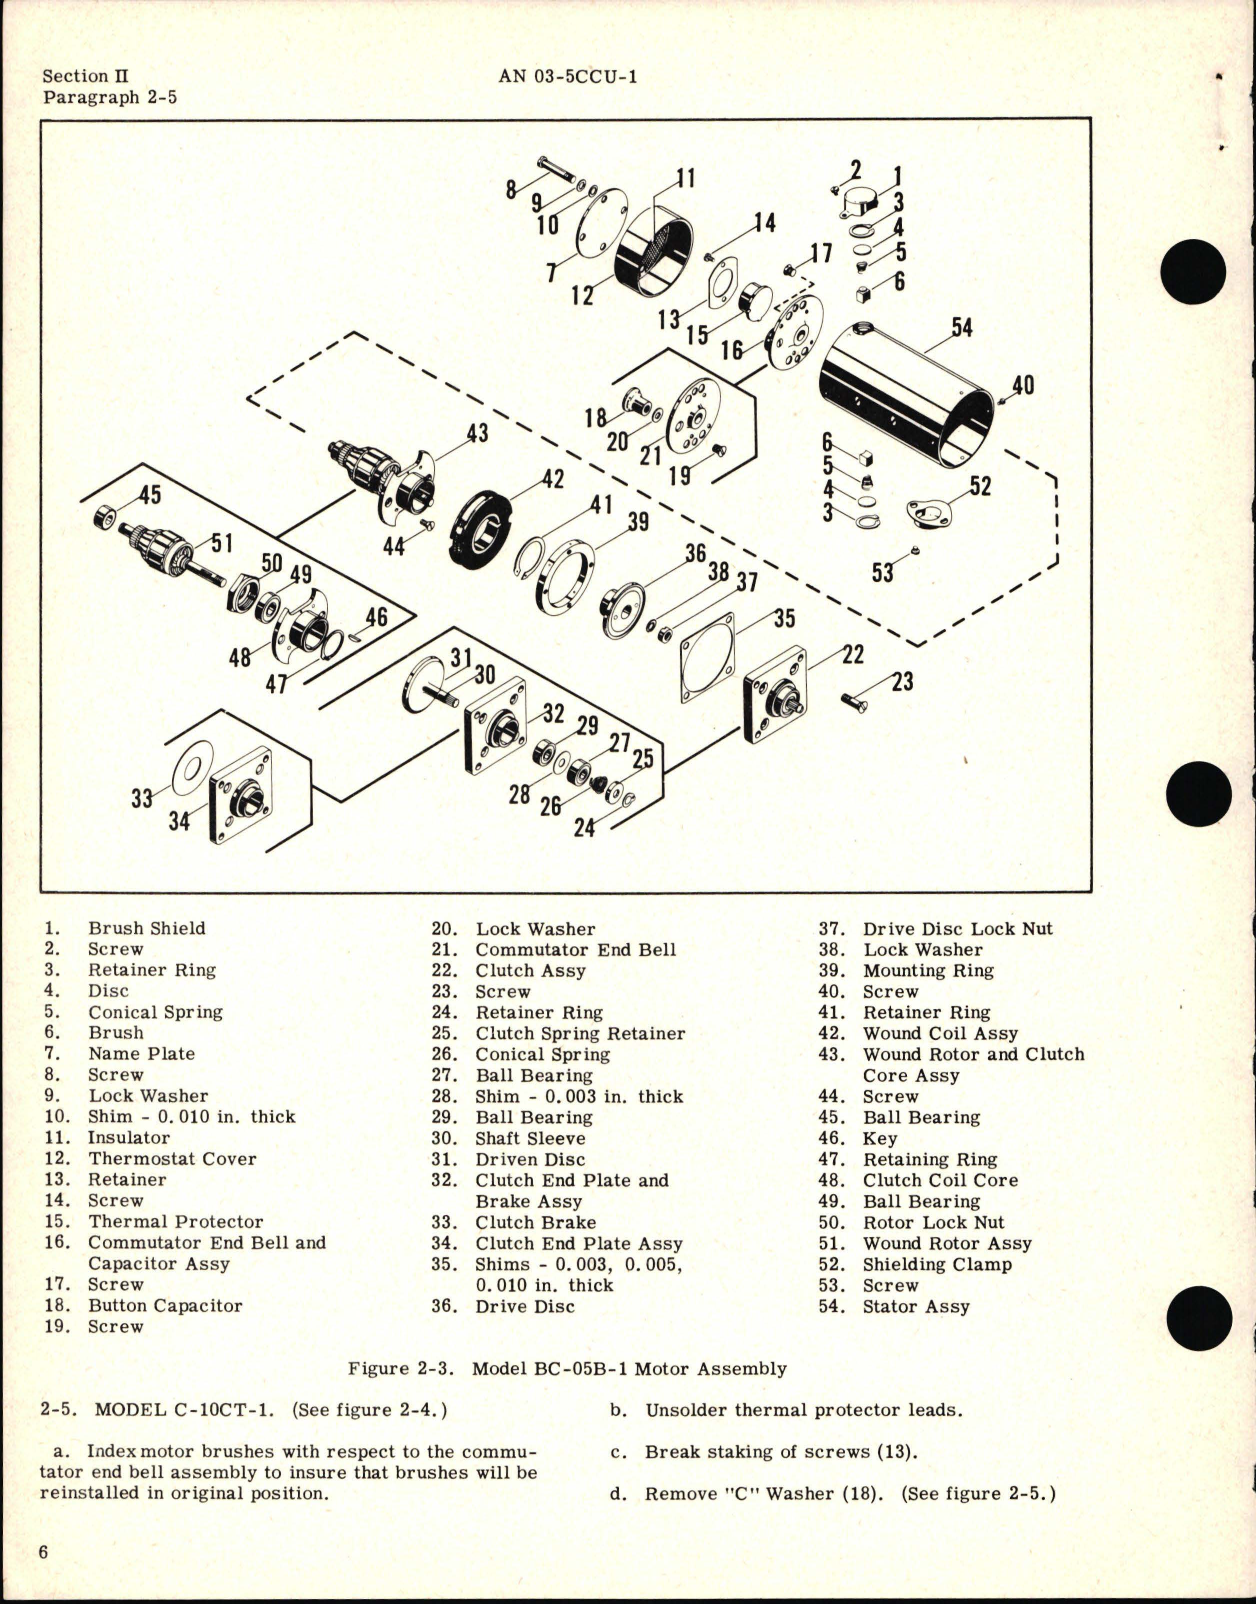 Sample page 8 from AirCorps Library document: Overhaul Instructions for Fractional Horsepower Motors 